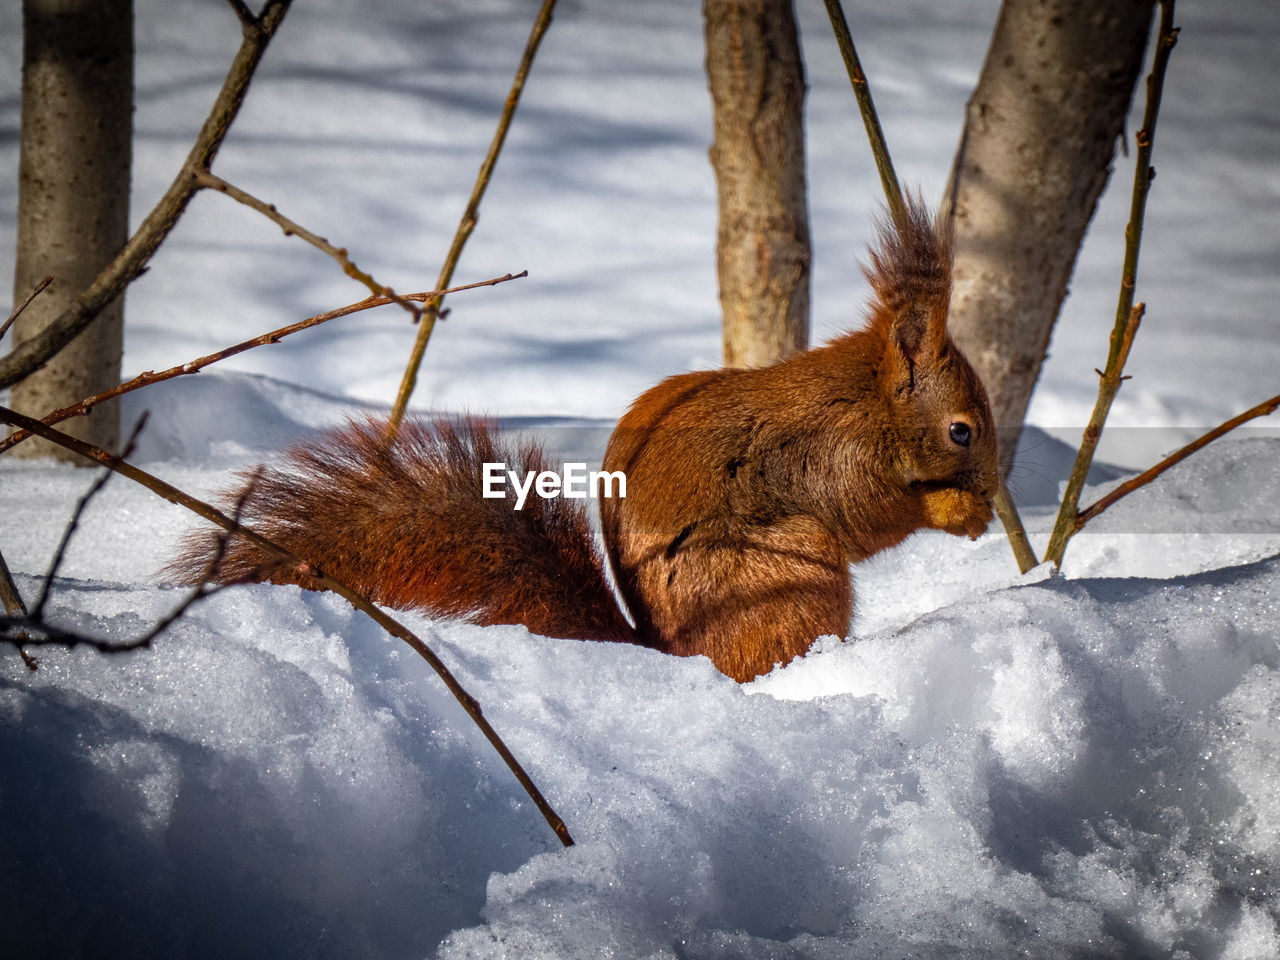 animal, winter, animal themes, snow, mammal, one animal, animal wildlife, squirrel, cold temperature, nature, wildlife, no people, branch, day, tree, rodent, outdoors